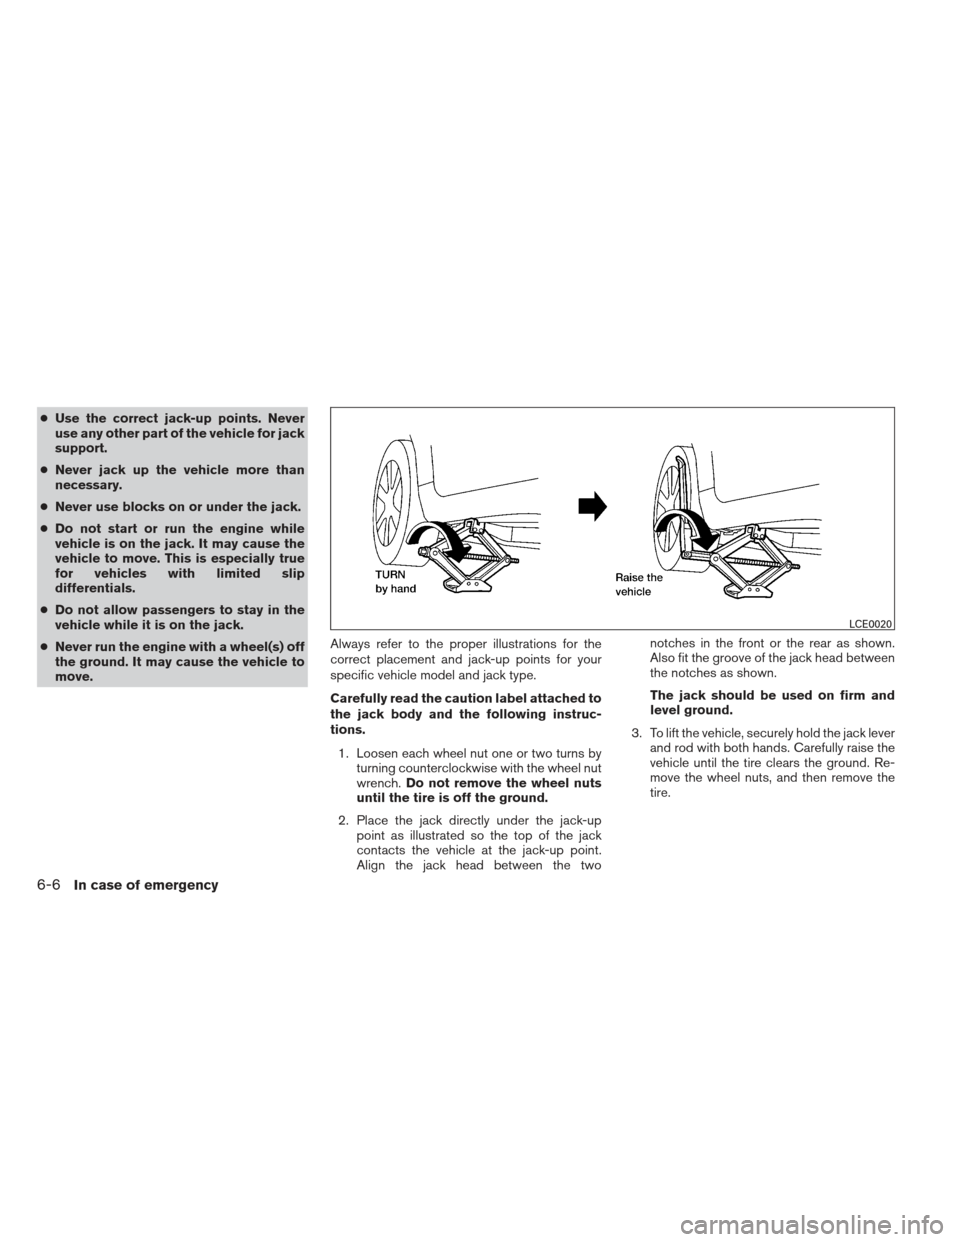 NISSAN ALTIMA 2013 L33 / 5.G Owners Manual ●Use the correct jack-up points. Never
use any other part of the vehicle for jack
support.
● Never jack up the vehicle more than
necessary.
● Never use blocks on or under the jack.
● Do not st